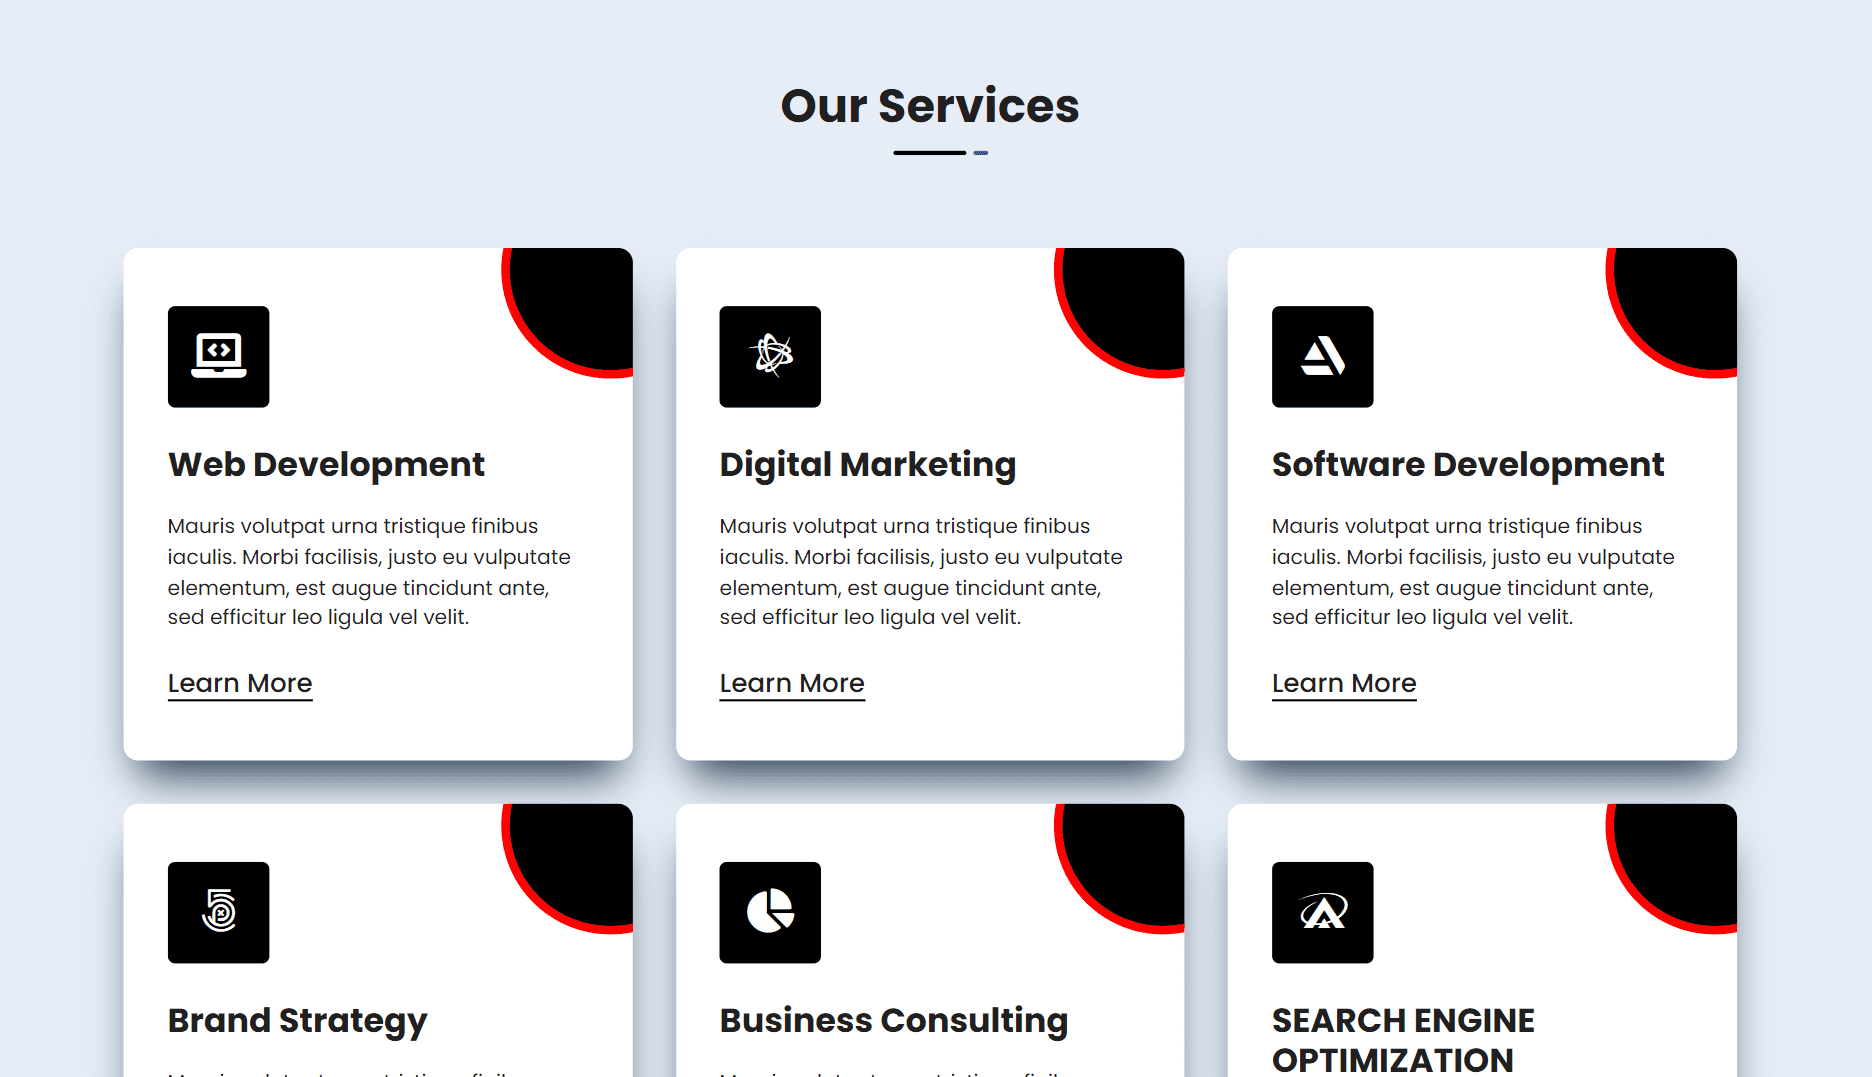 Our Services Section using CSS